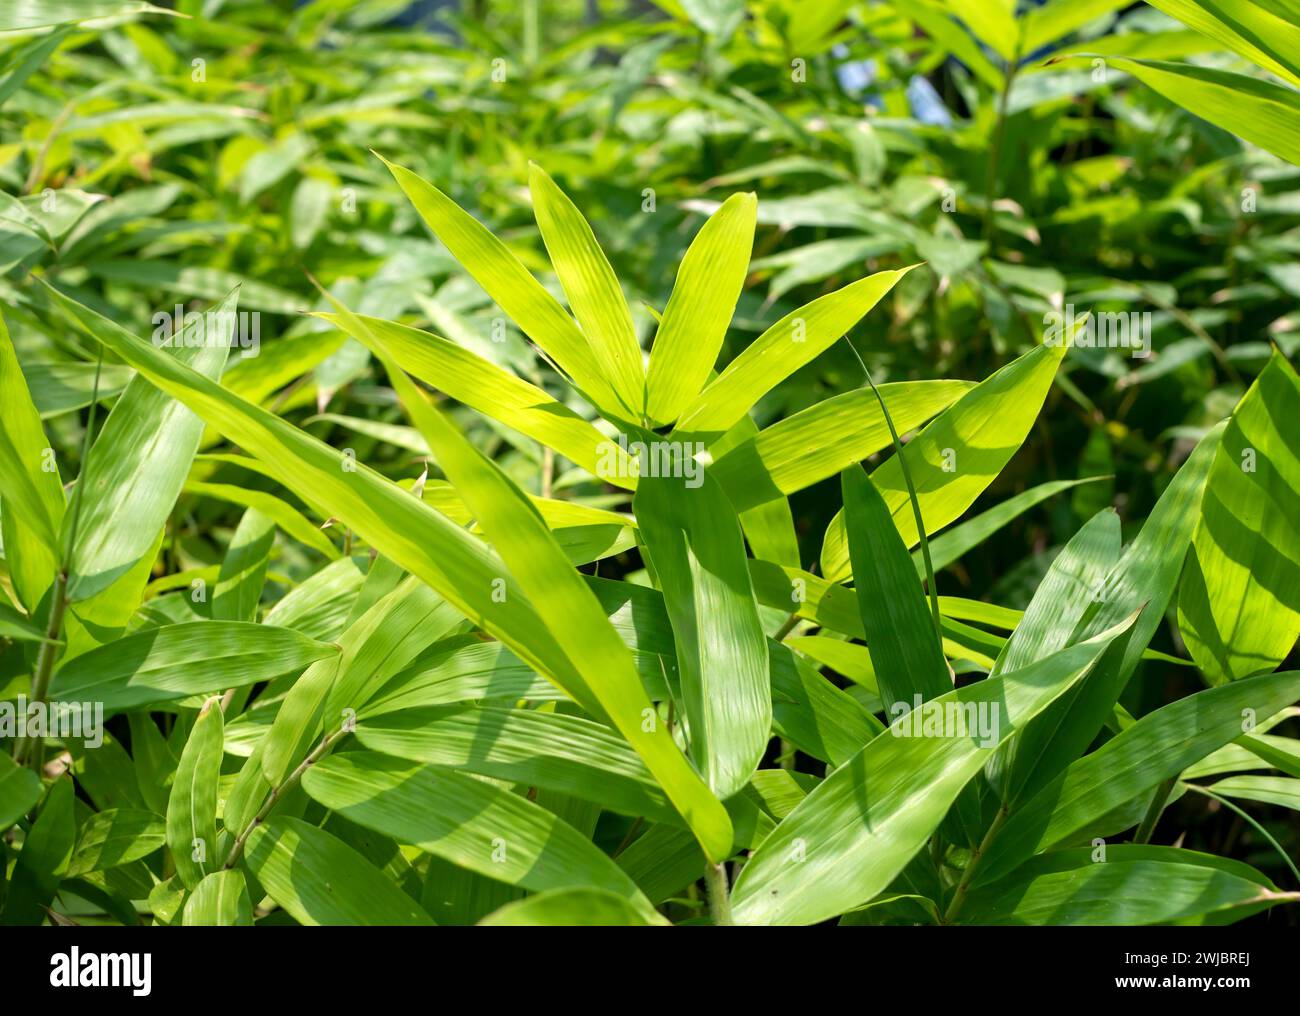 Young bamboo plant, Bambusa sp., in the nursery for natural background. Stock Photo